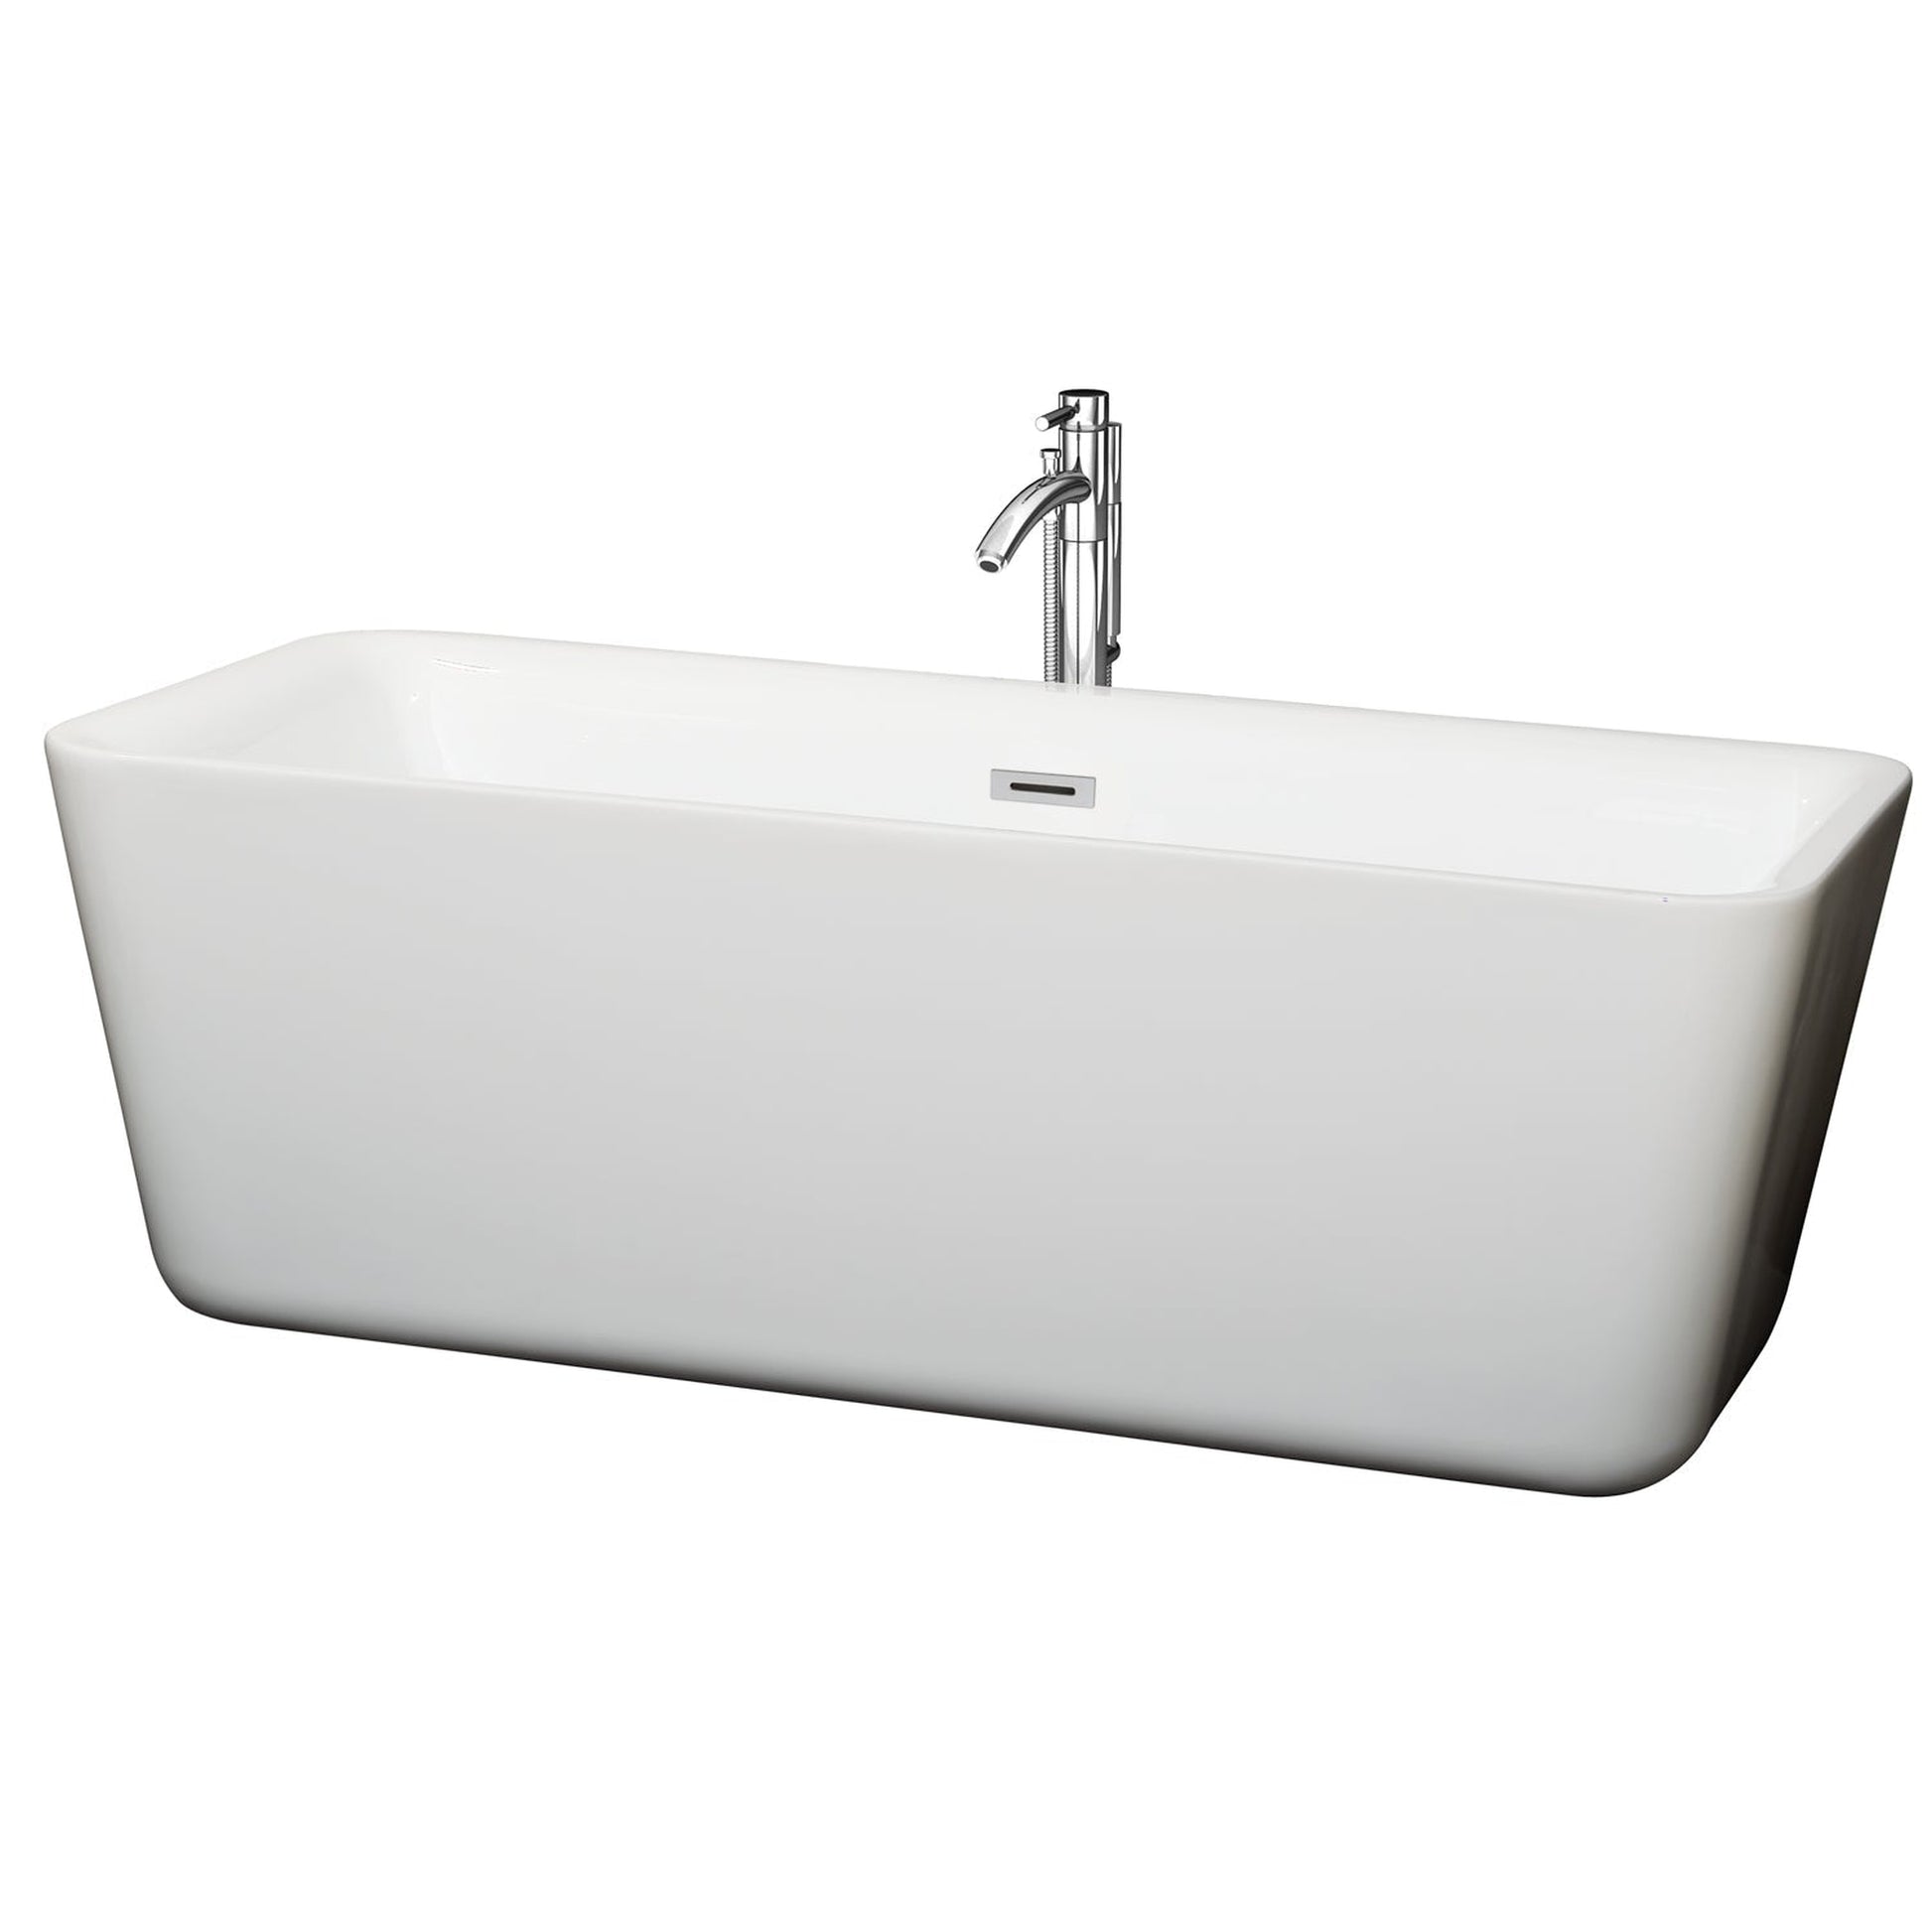 Wyndham Collection Emily 69" Freestanding Bathtub in White With Floor Mounted Faucet, Drain and Overflow Trim in Polished Chrome